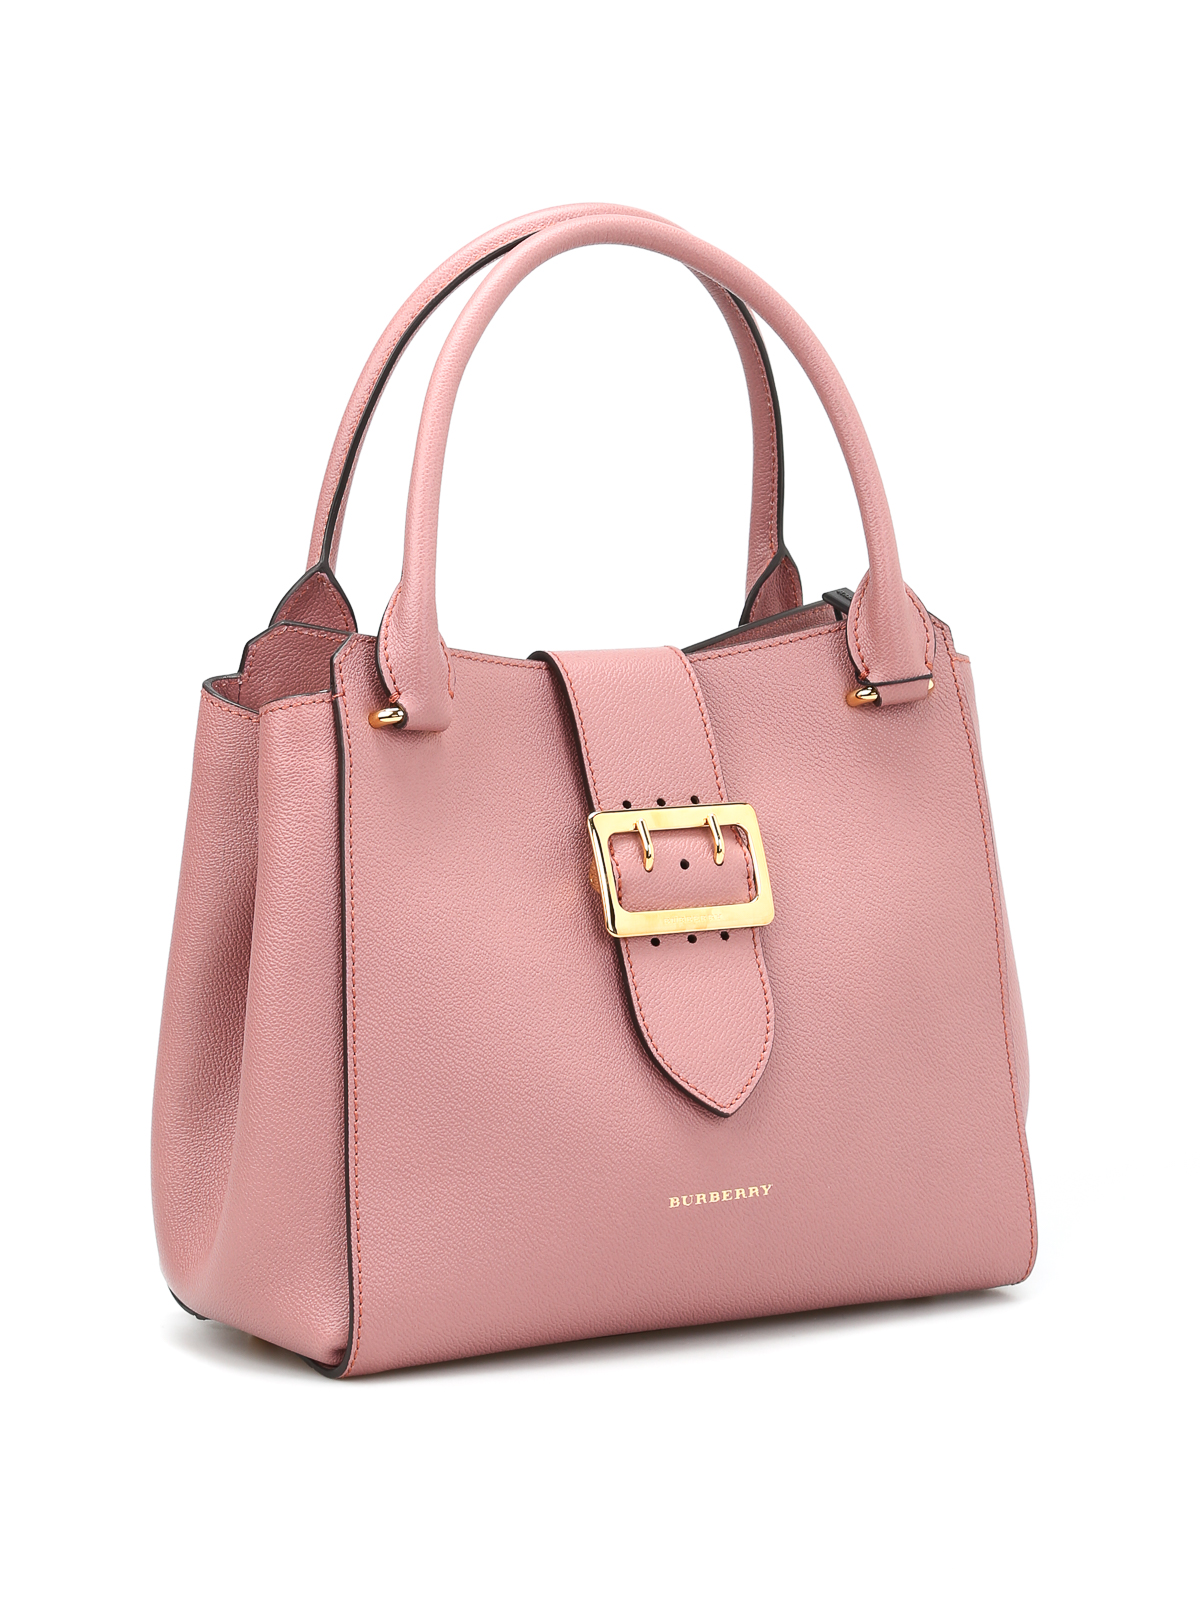 The Buckle medium leather tote by Burberry - totes bags | iKRIX